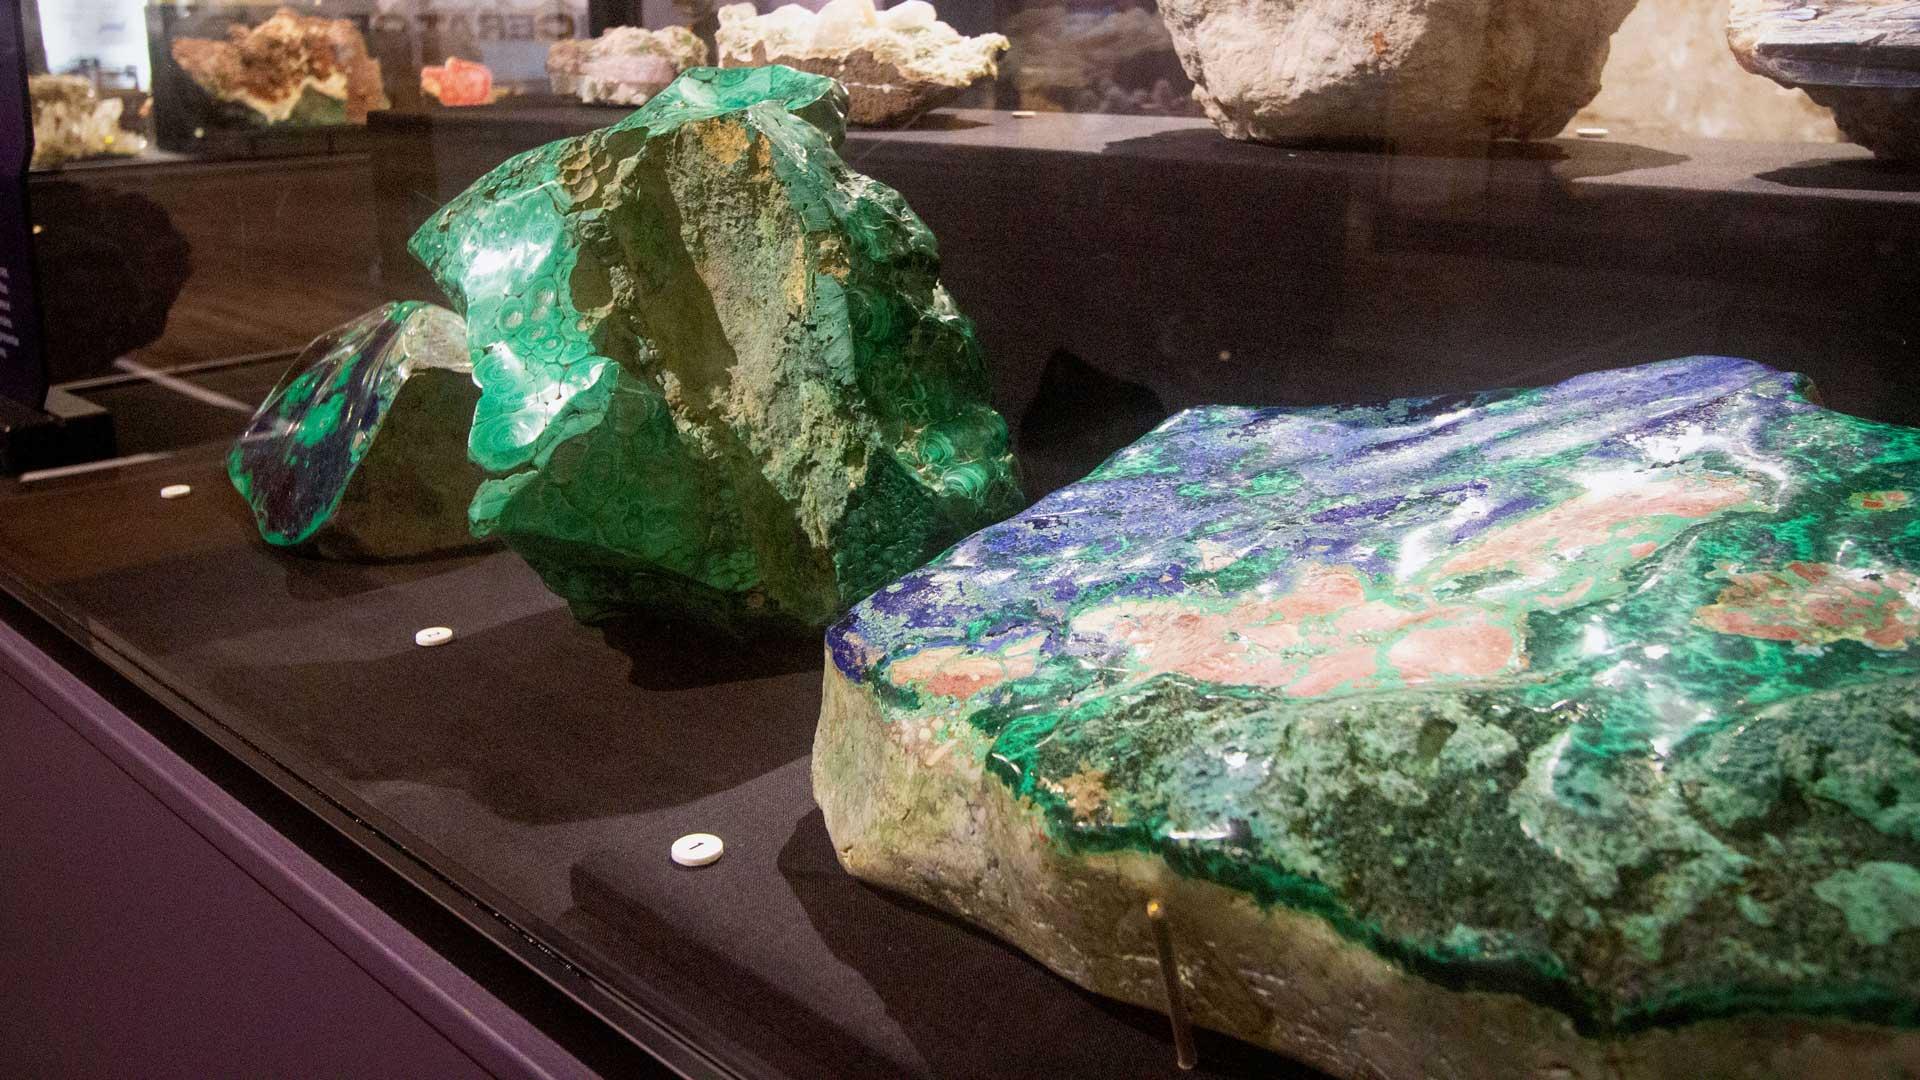 Large mineral specimens from the Natural Beauty exhibit.